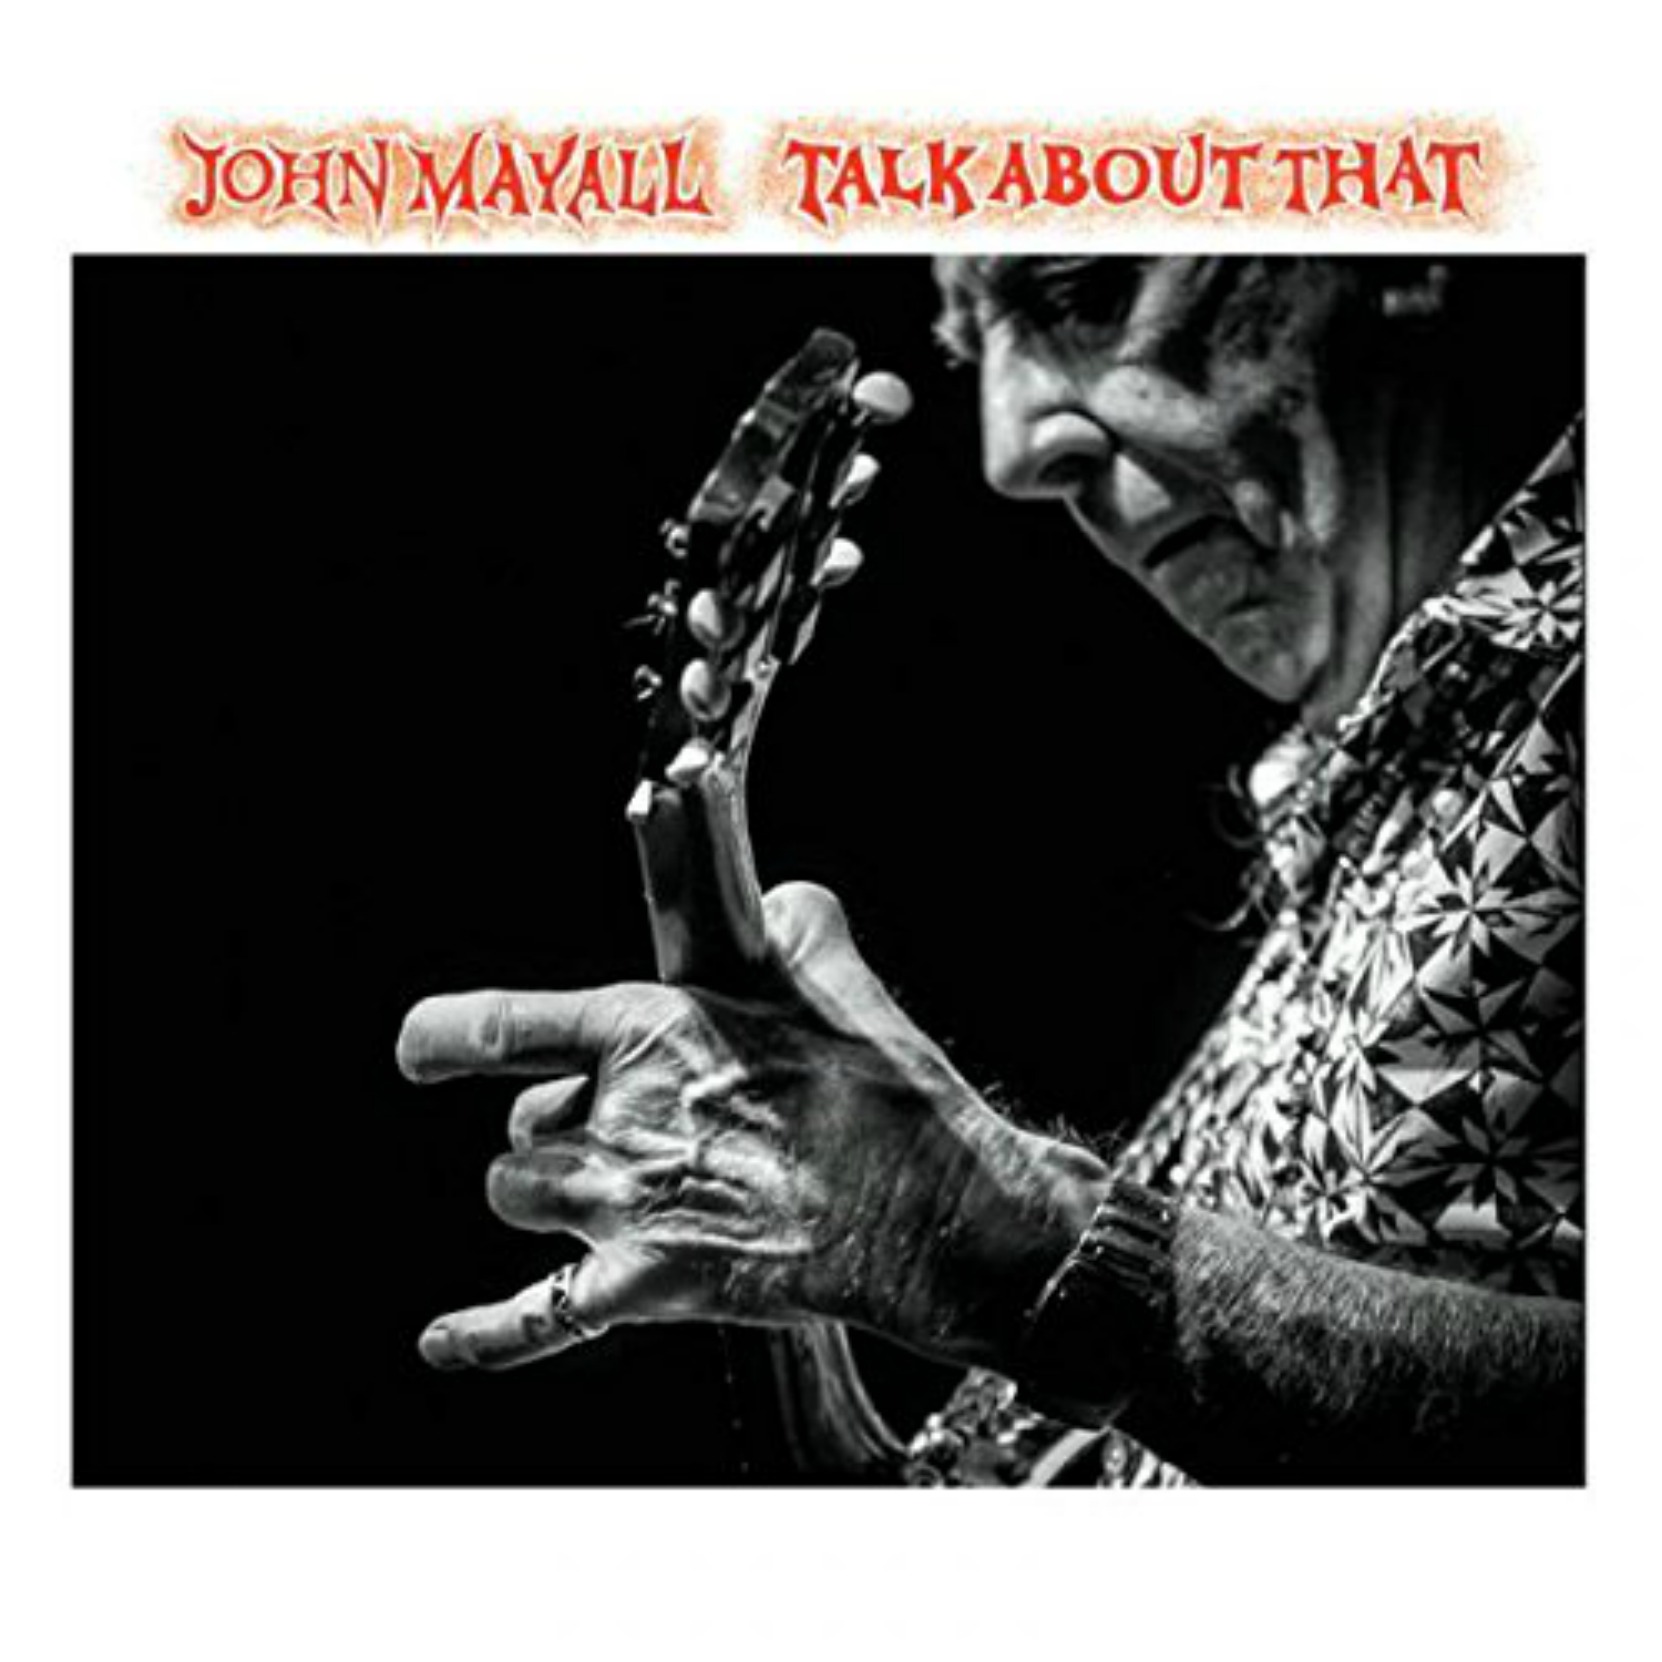 Album cover, John Mayall, Talk About That, released in 2017